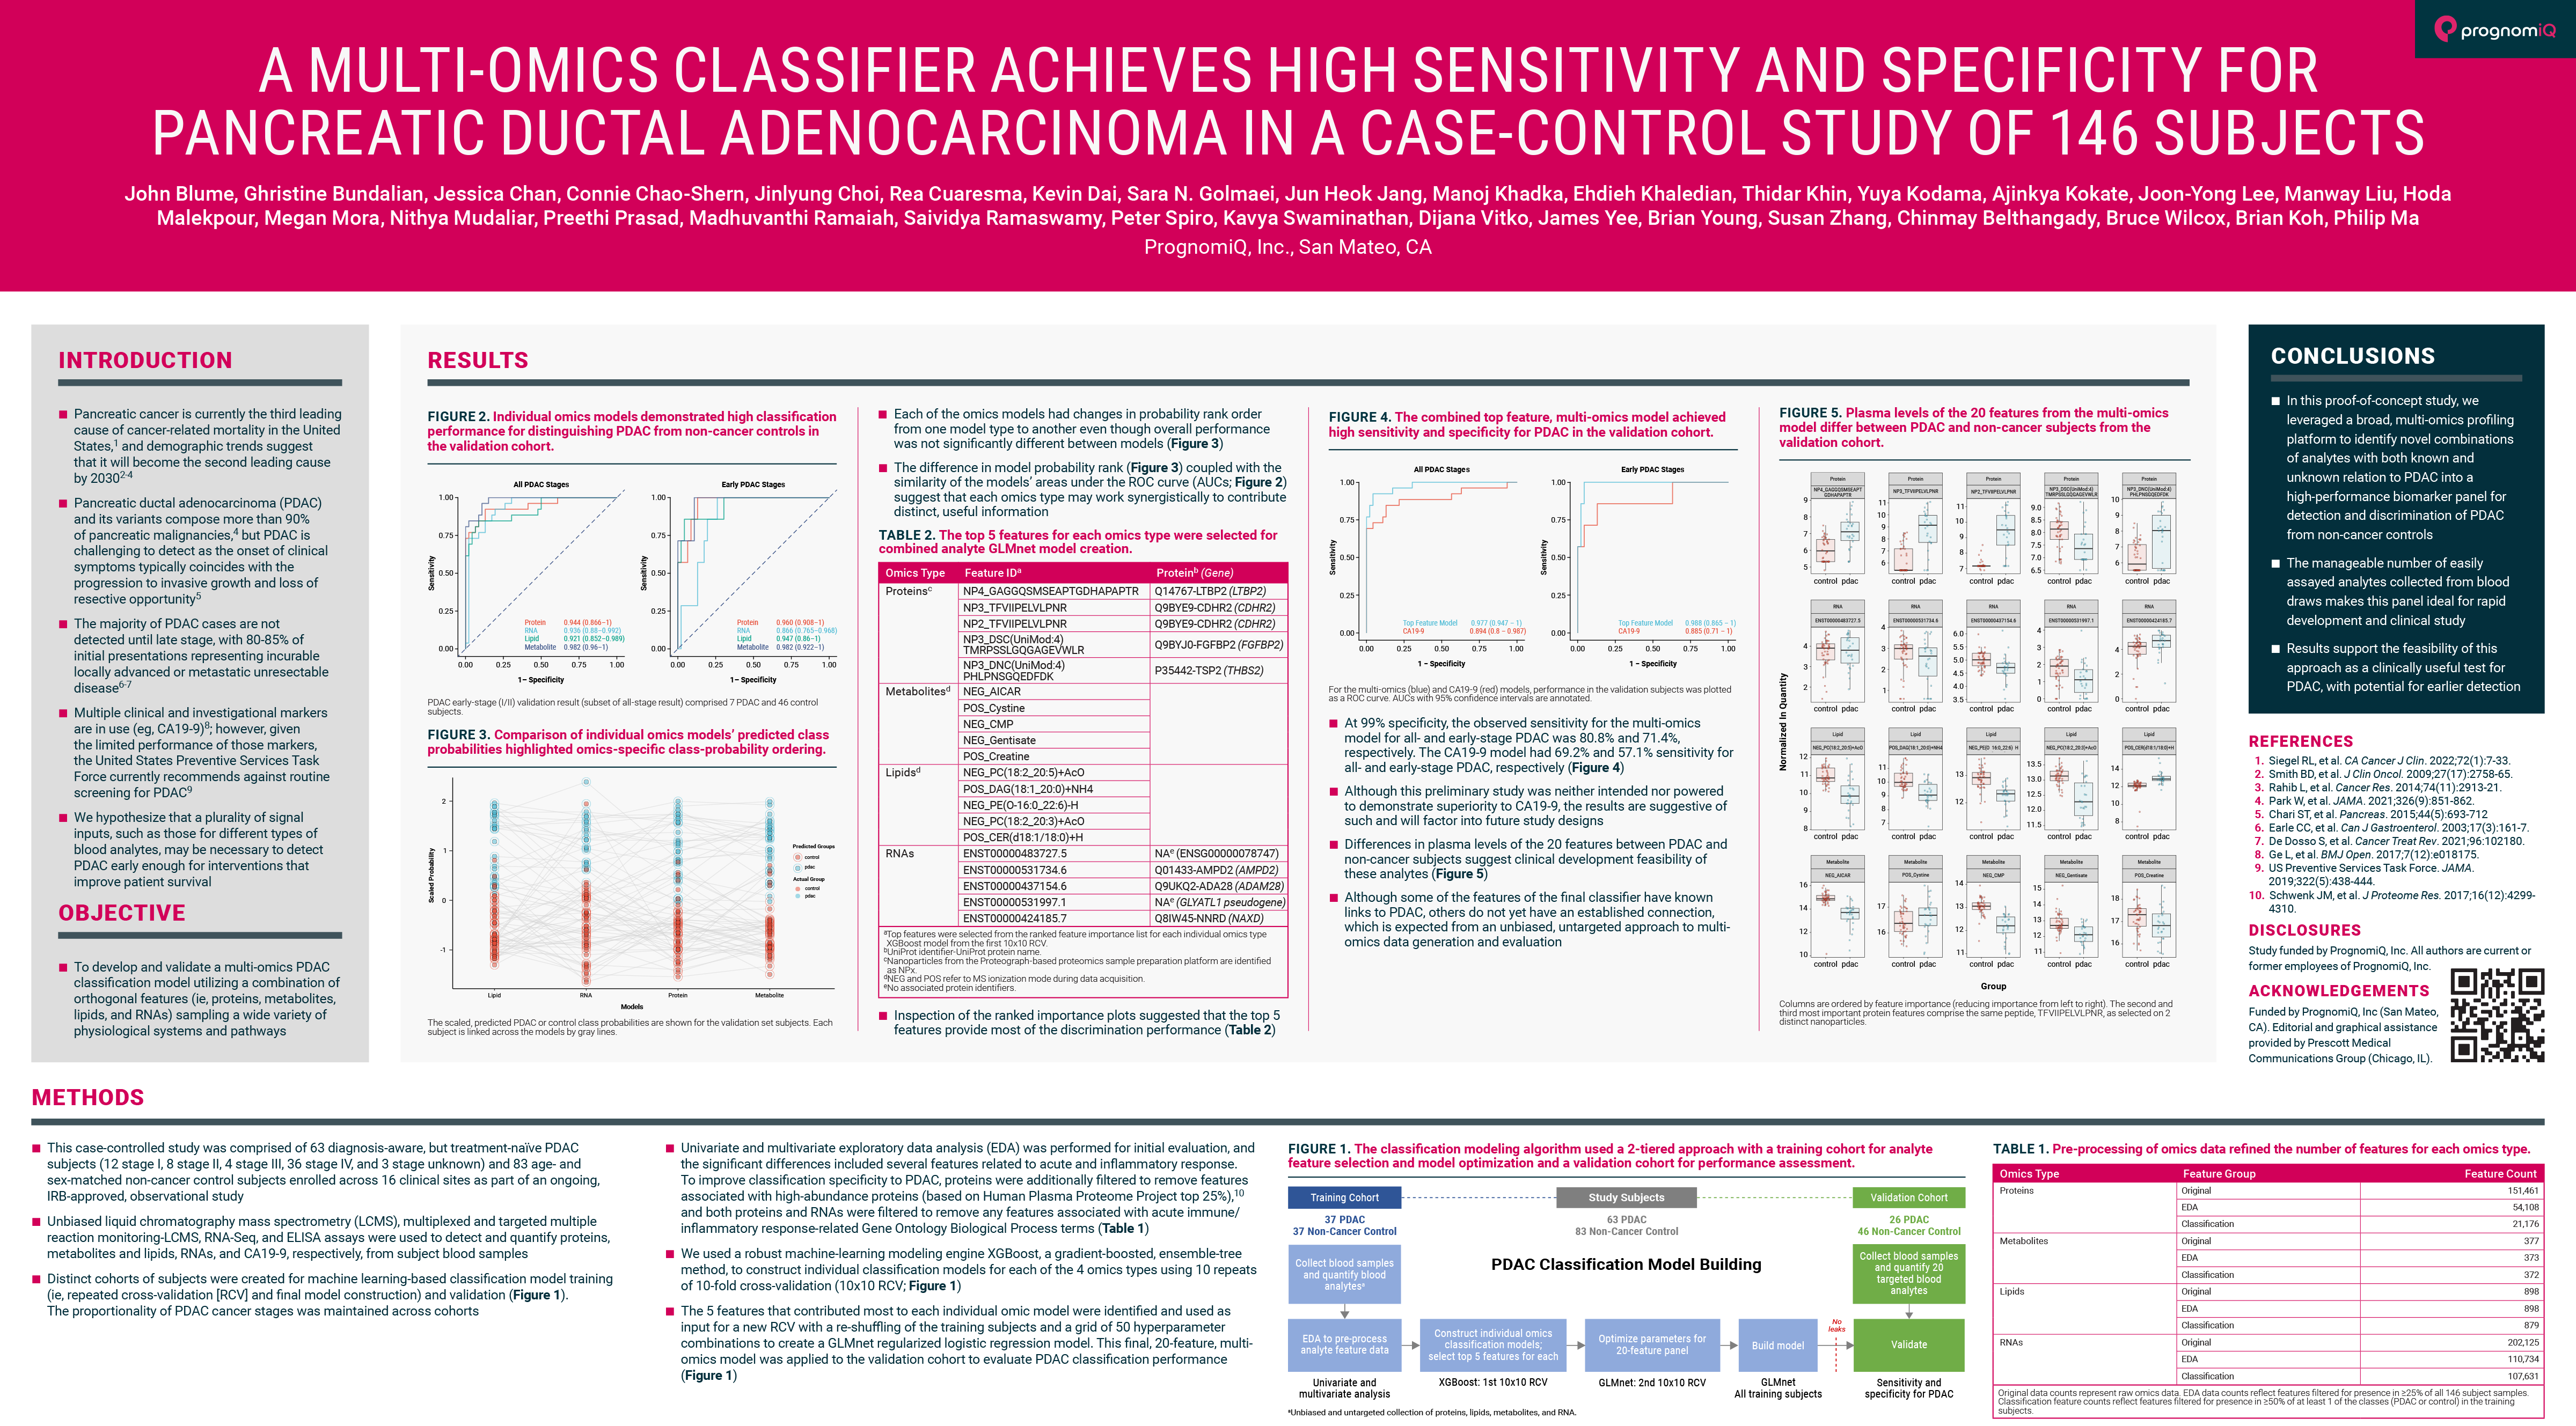 scientific poster showing that a multi-omics classifier achieves high sensitivity and specificity for pancreatic ductal adenocarcinoma in a case-control study of 146 subjects